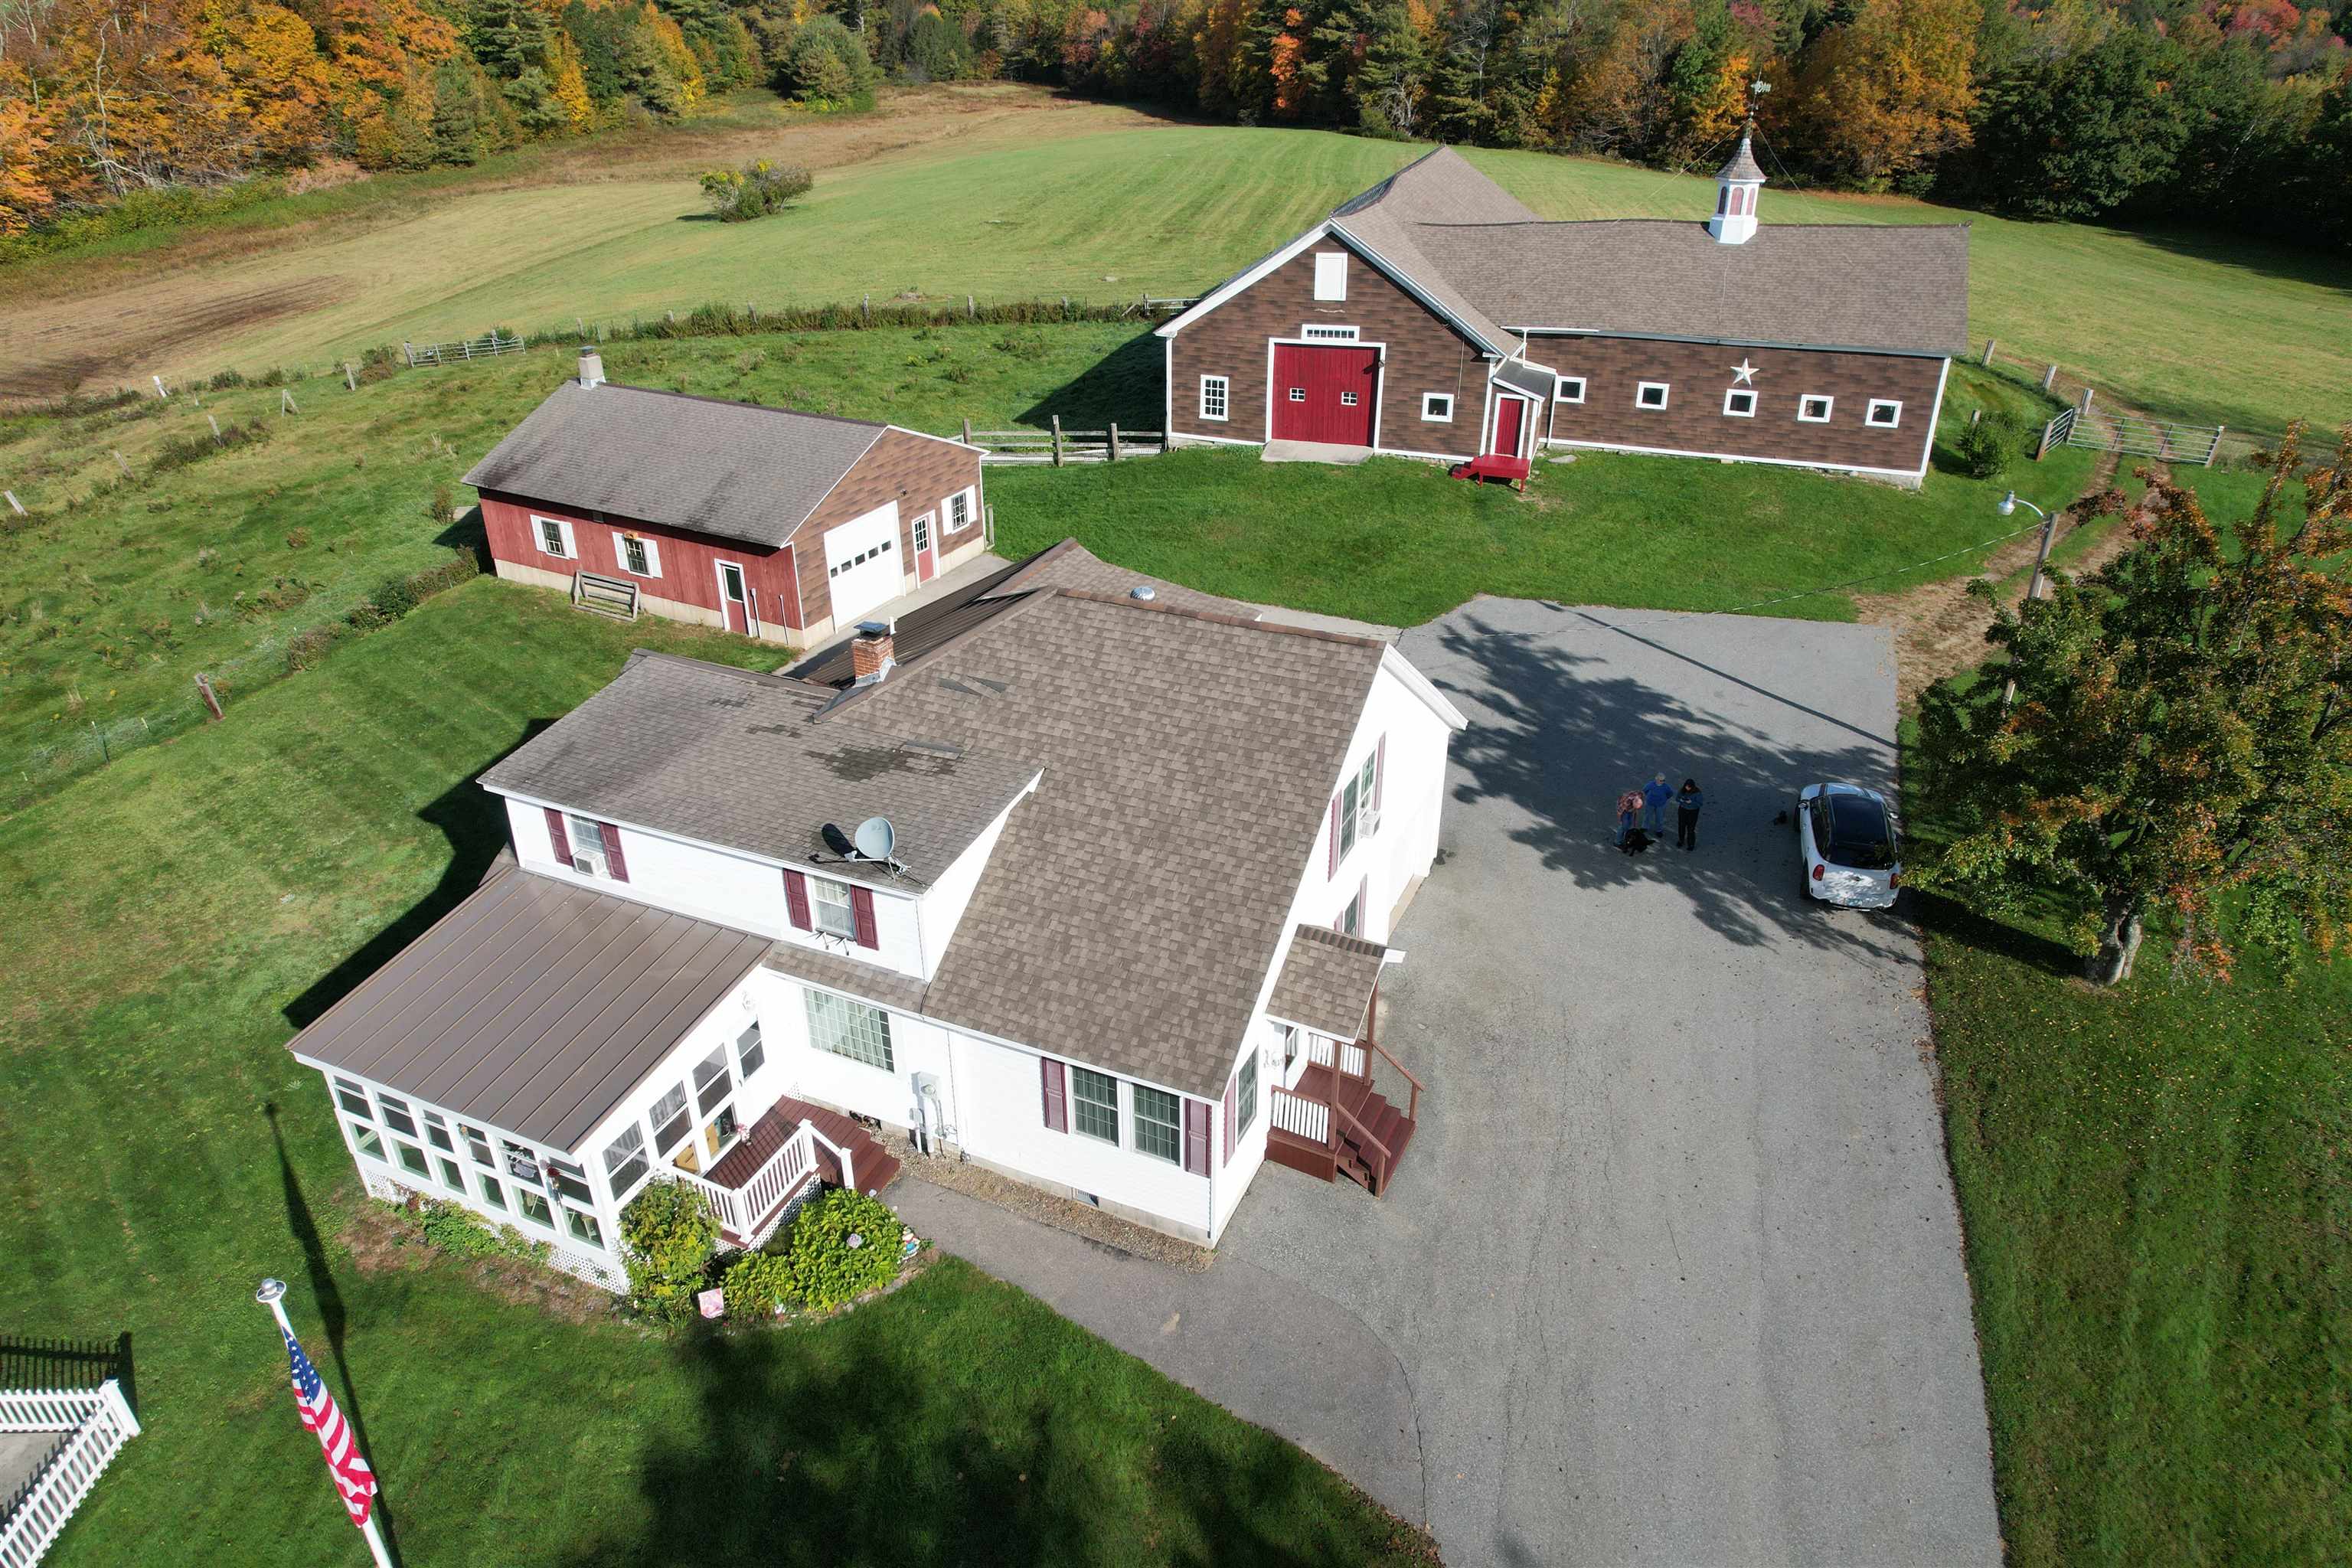 This property has everything for a farm